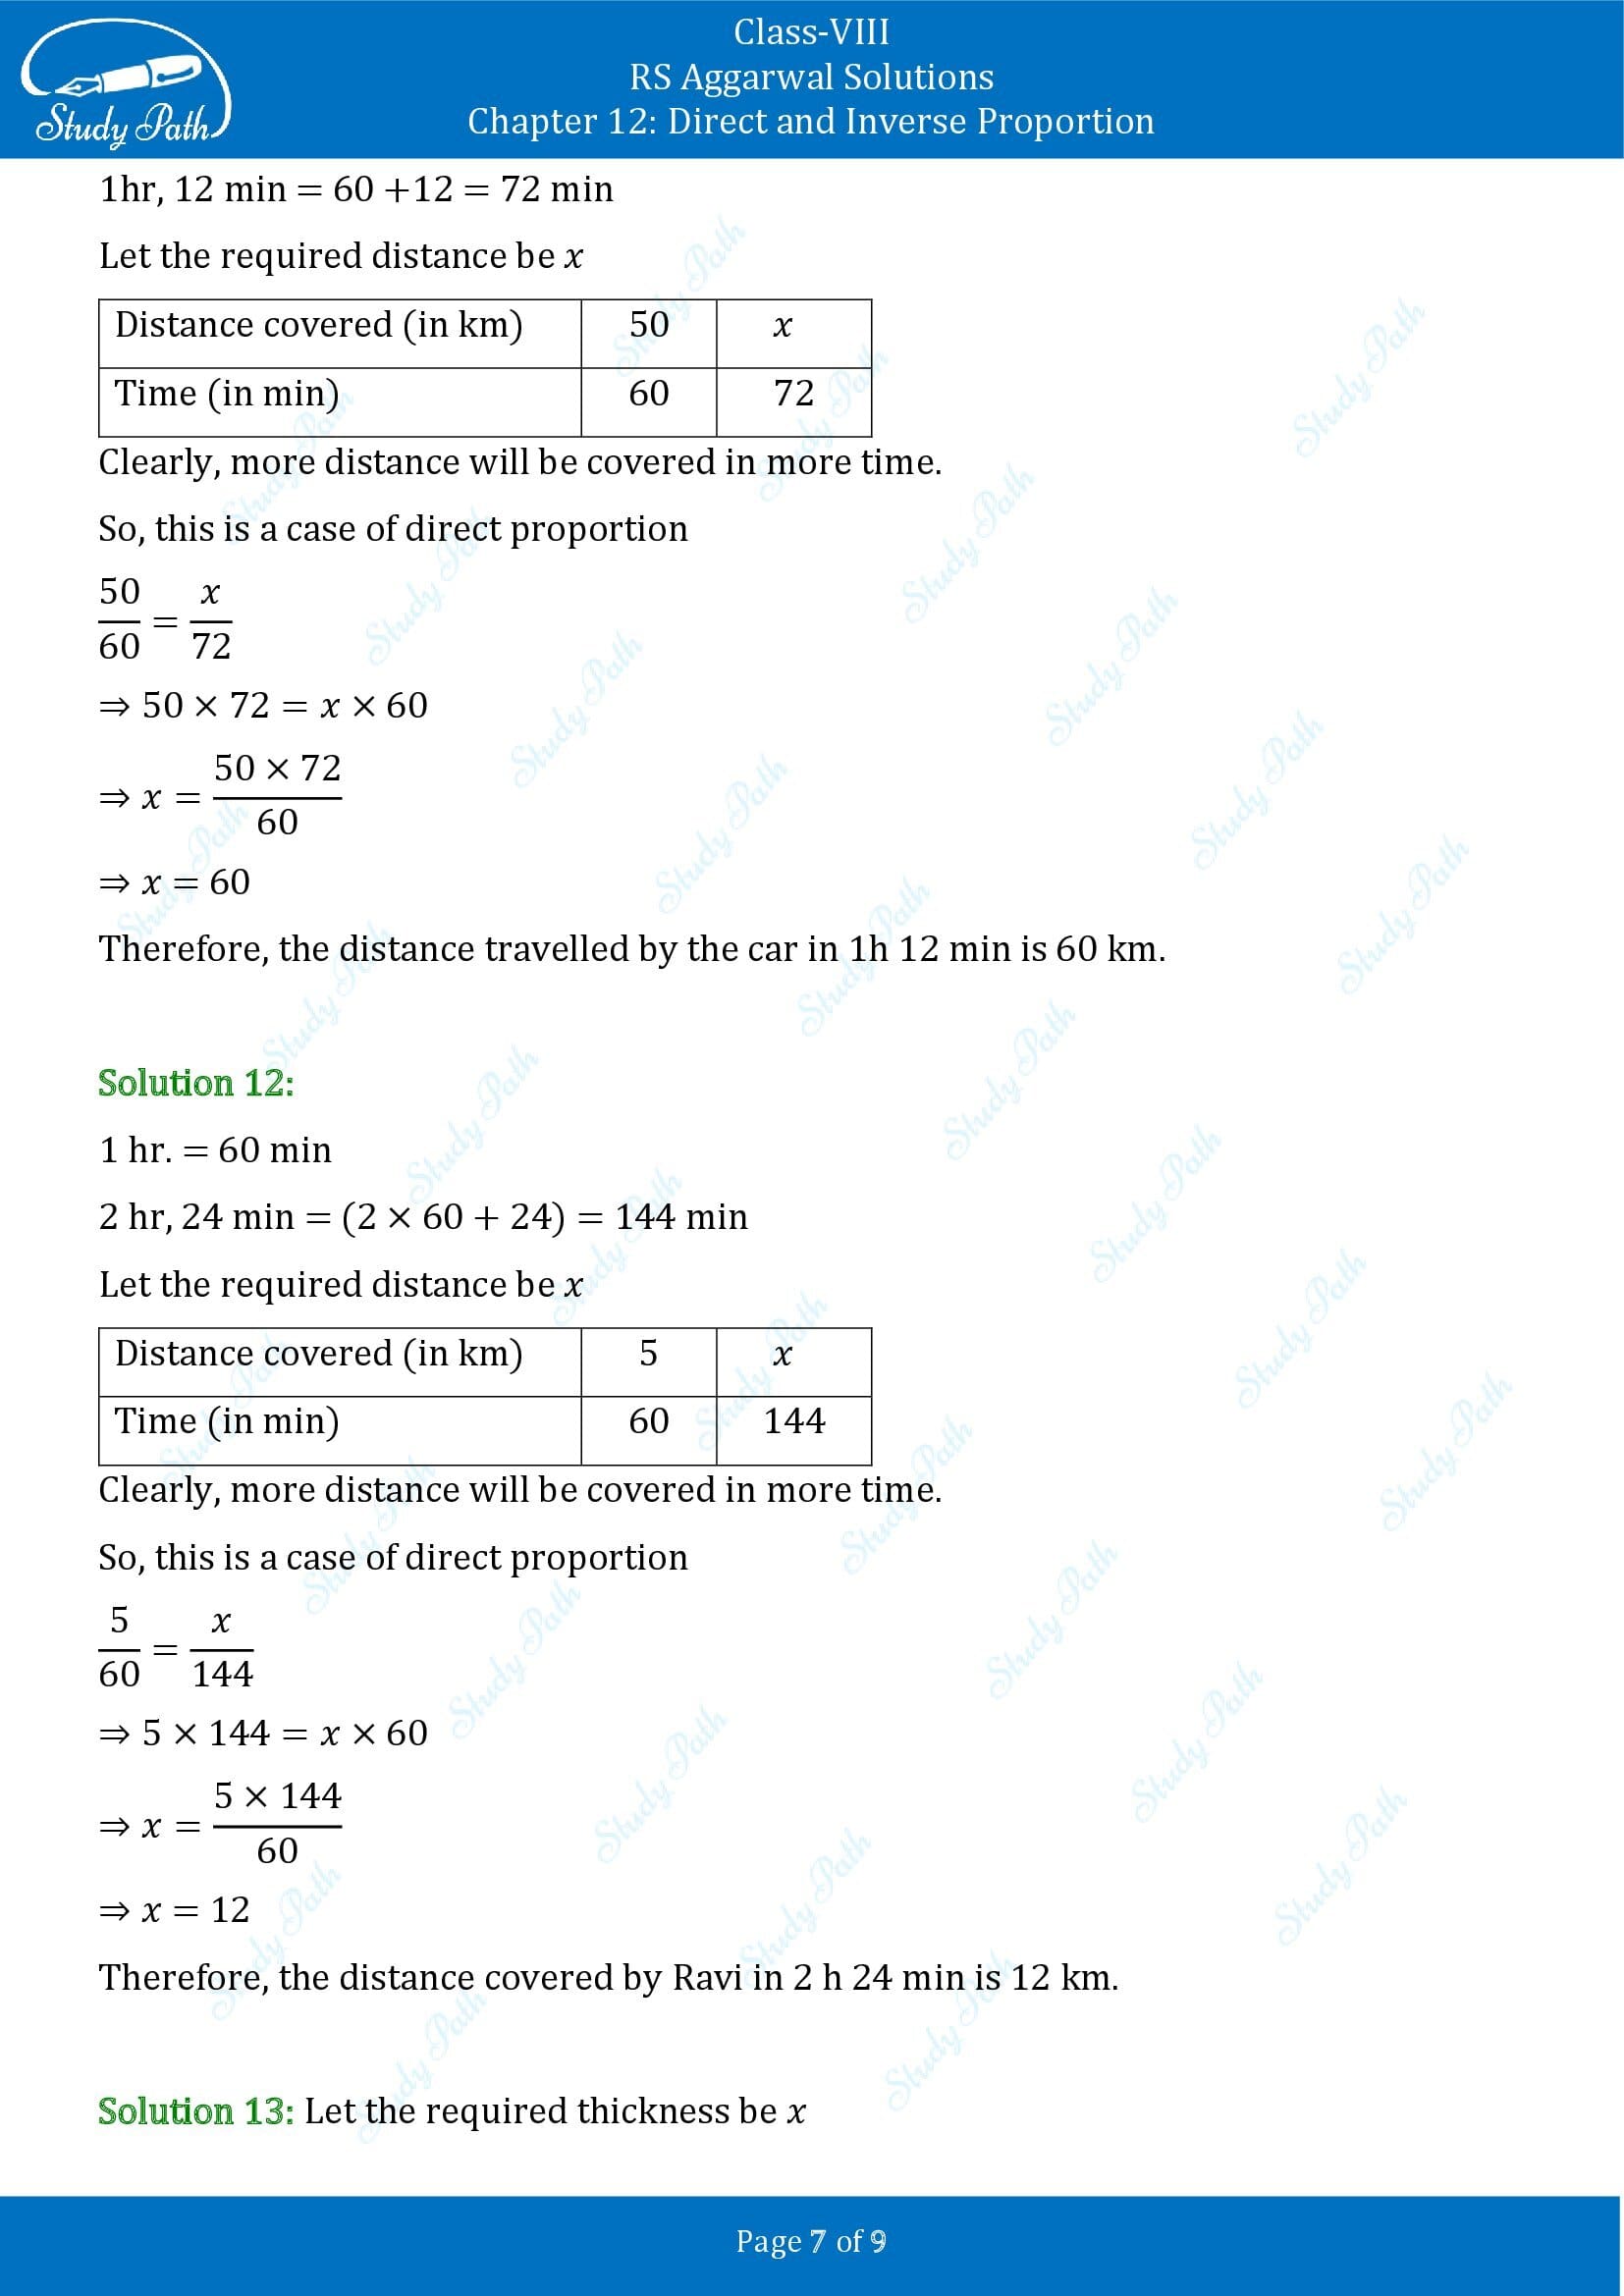 RS Aggarwal Solutions Class 8 Chapter 12 Direct and Inverse Proportion Exercise 12A 00007